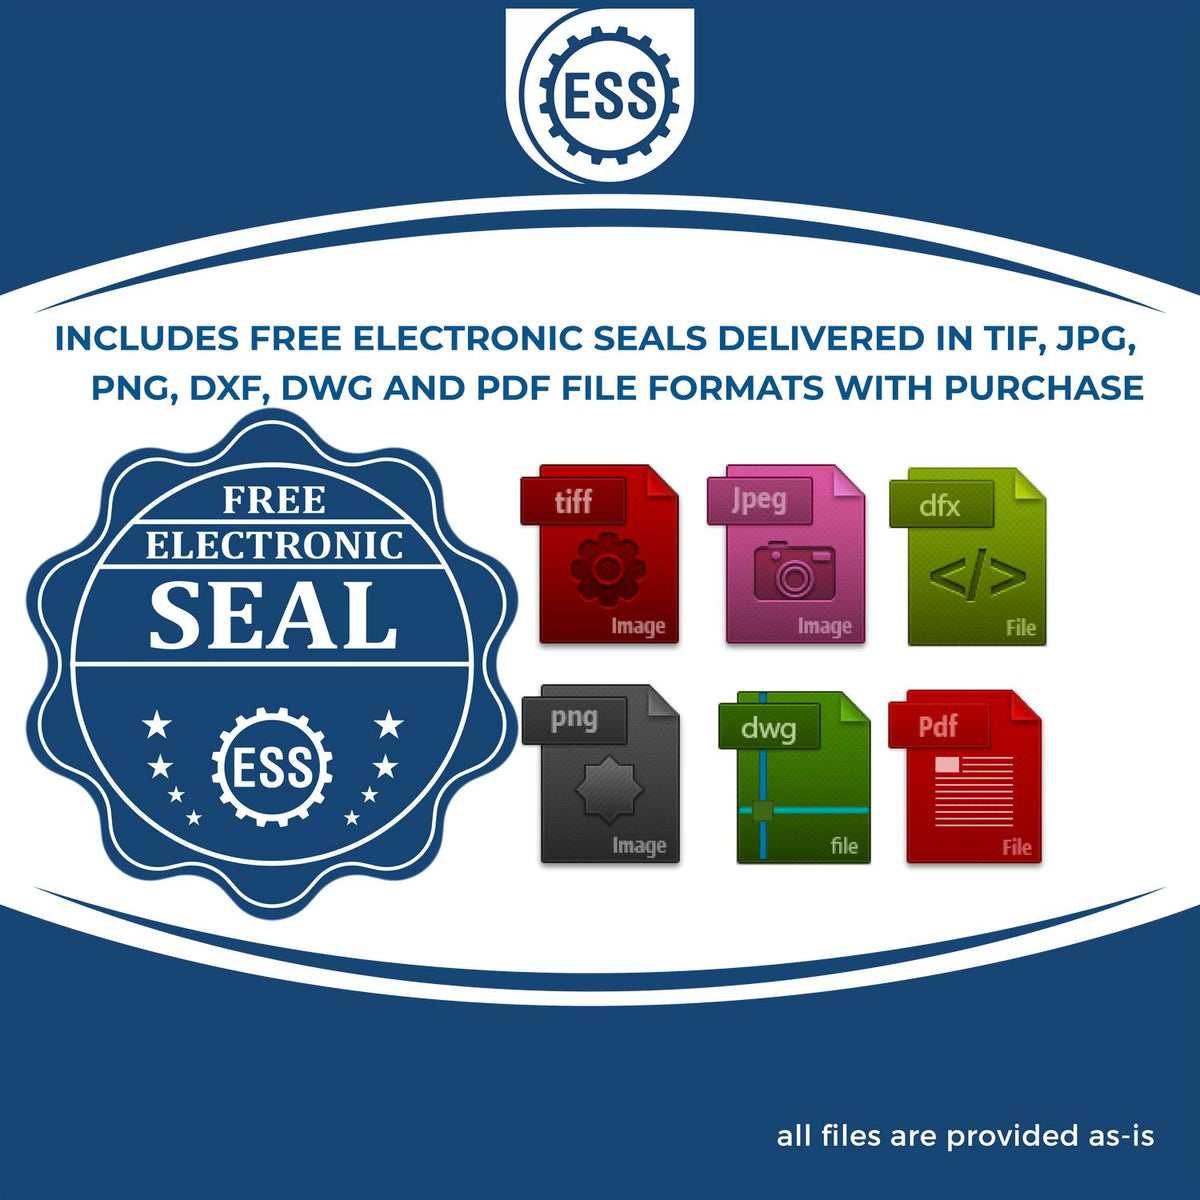 An infographic for the free electronic seal for the Premium MaxLight Pre-Inked New Hampshire Landscape Architectural Stamp illustrating the different file type icons such as DXF, DWG, TIF, JPG and PNG.